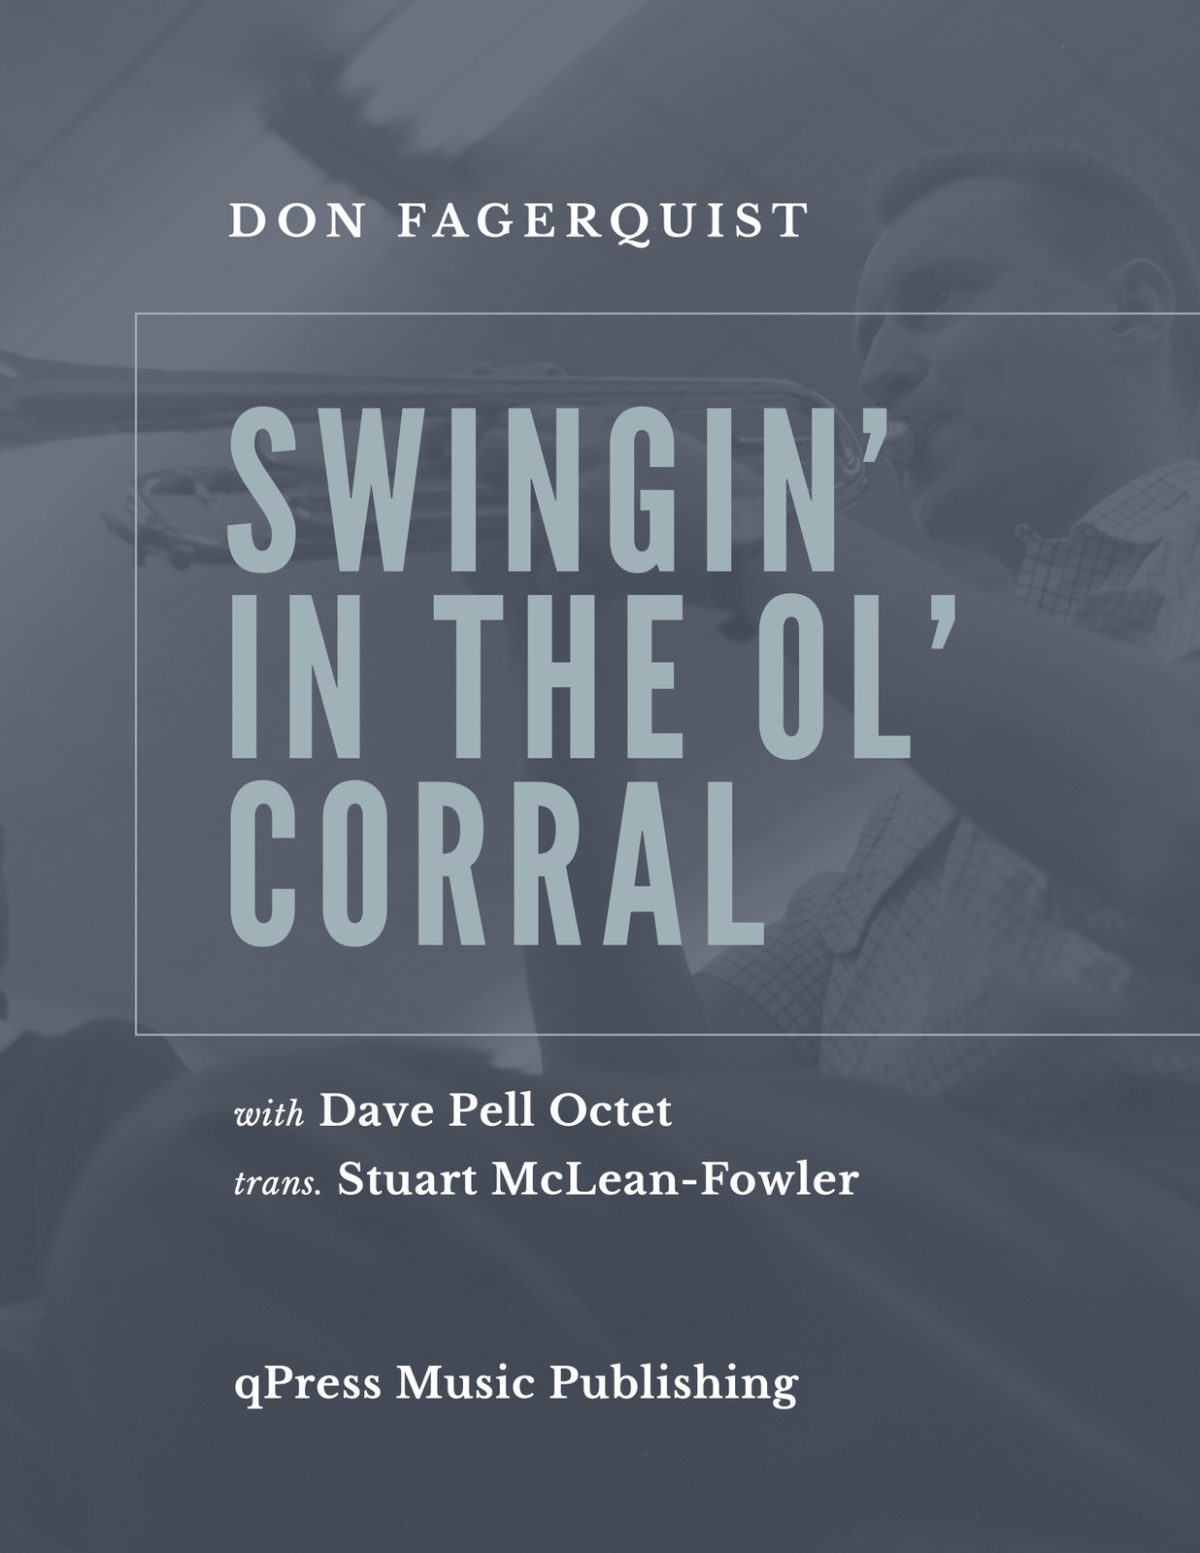 Fagerquist, Swingin' In the Ol' Corral